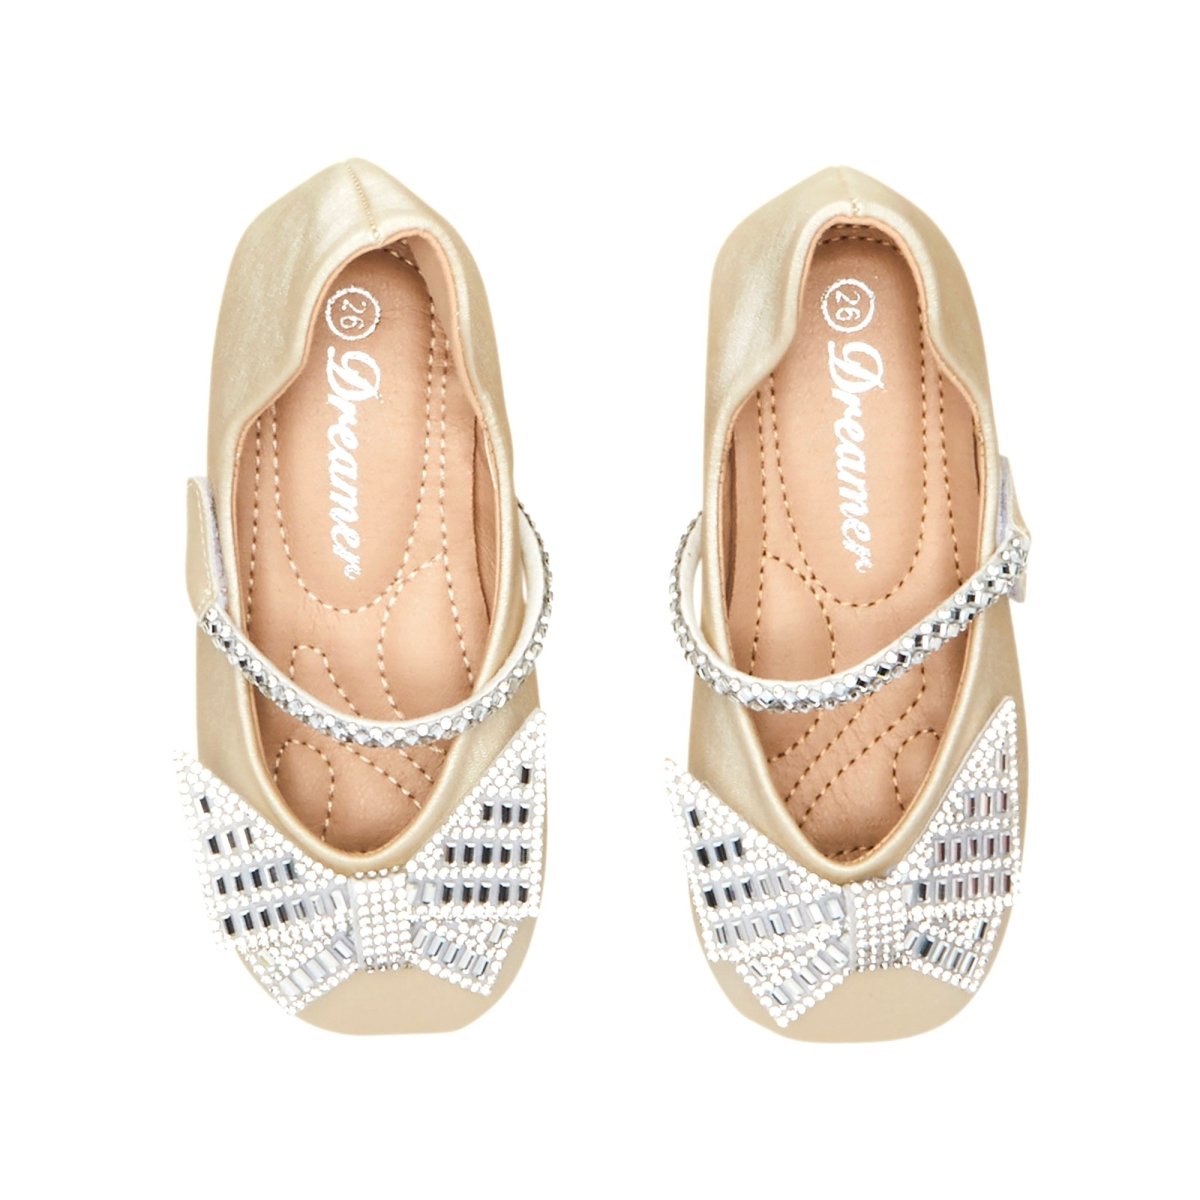 BUTTERFLY CRYSTAL SHOES - MINI DREAMERS